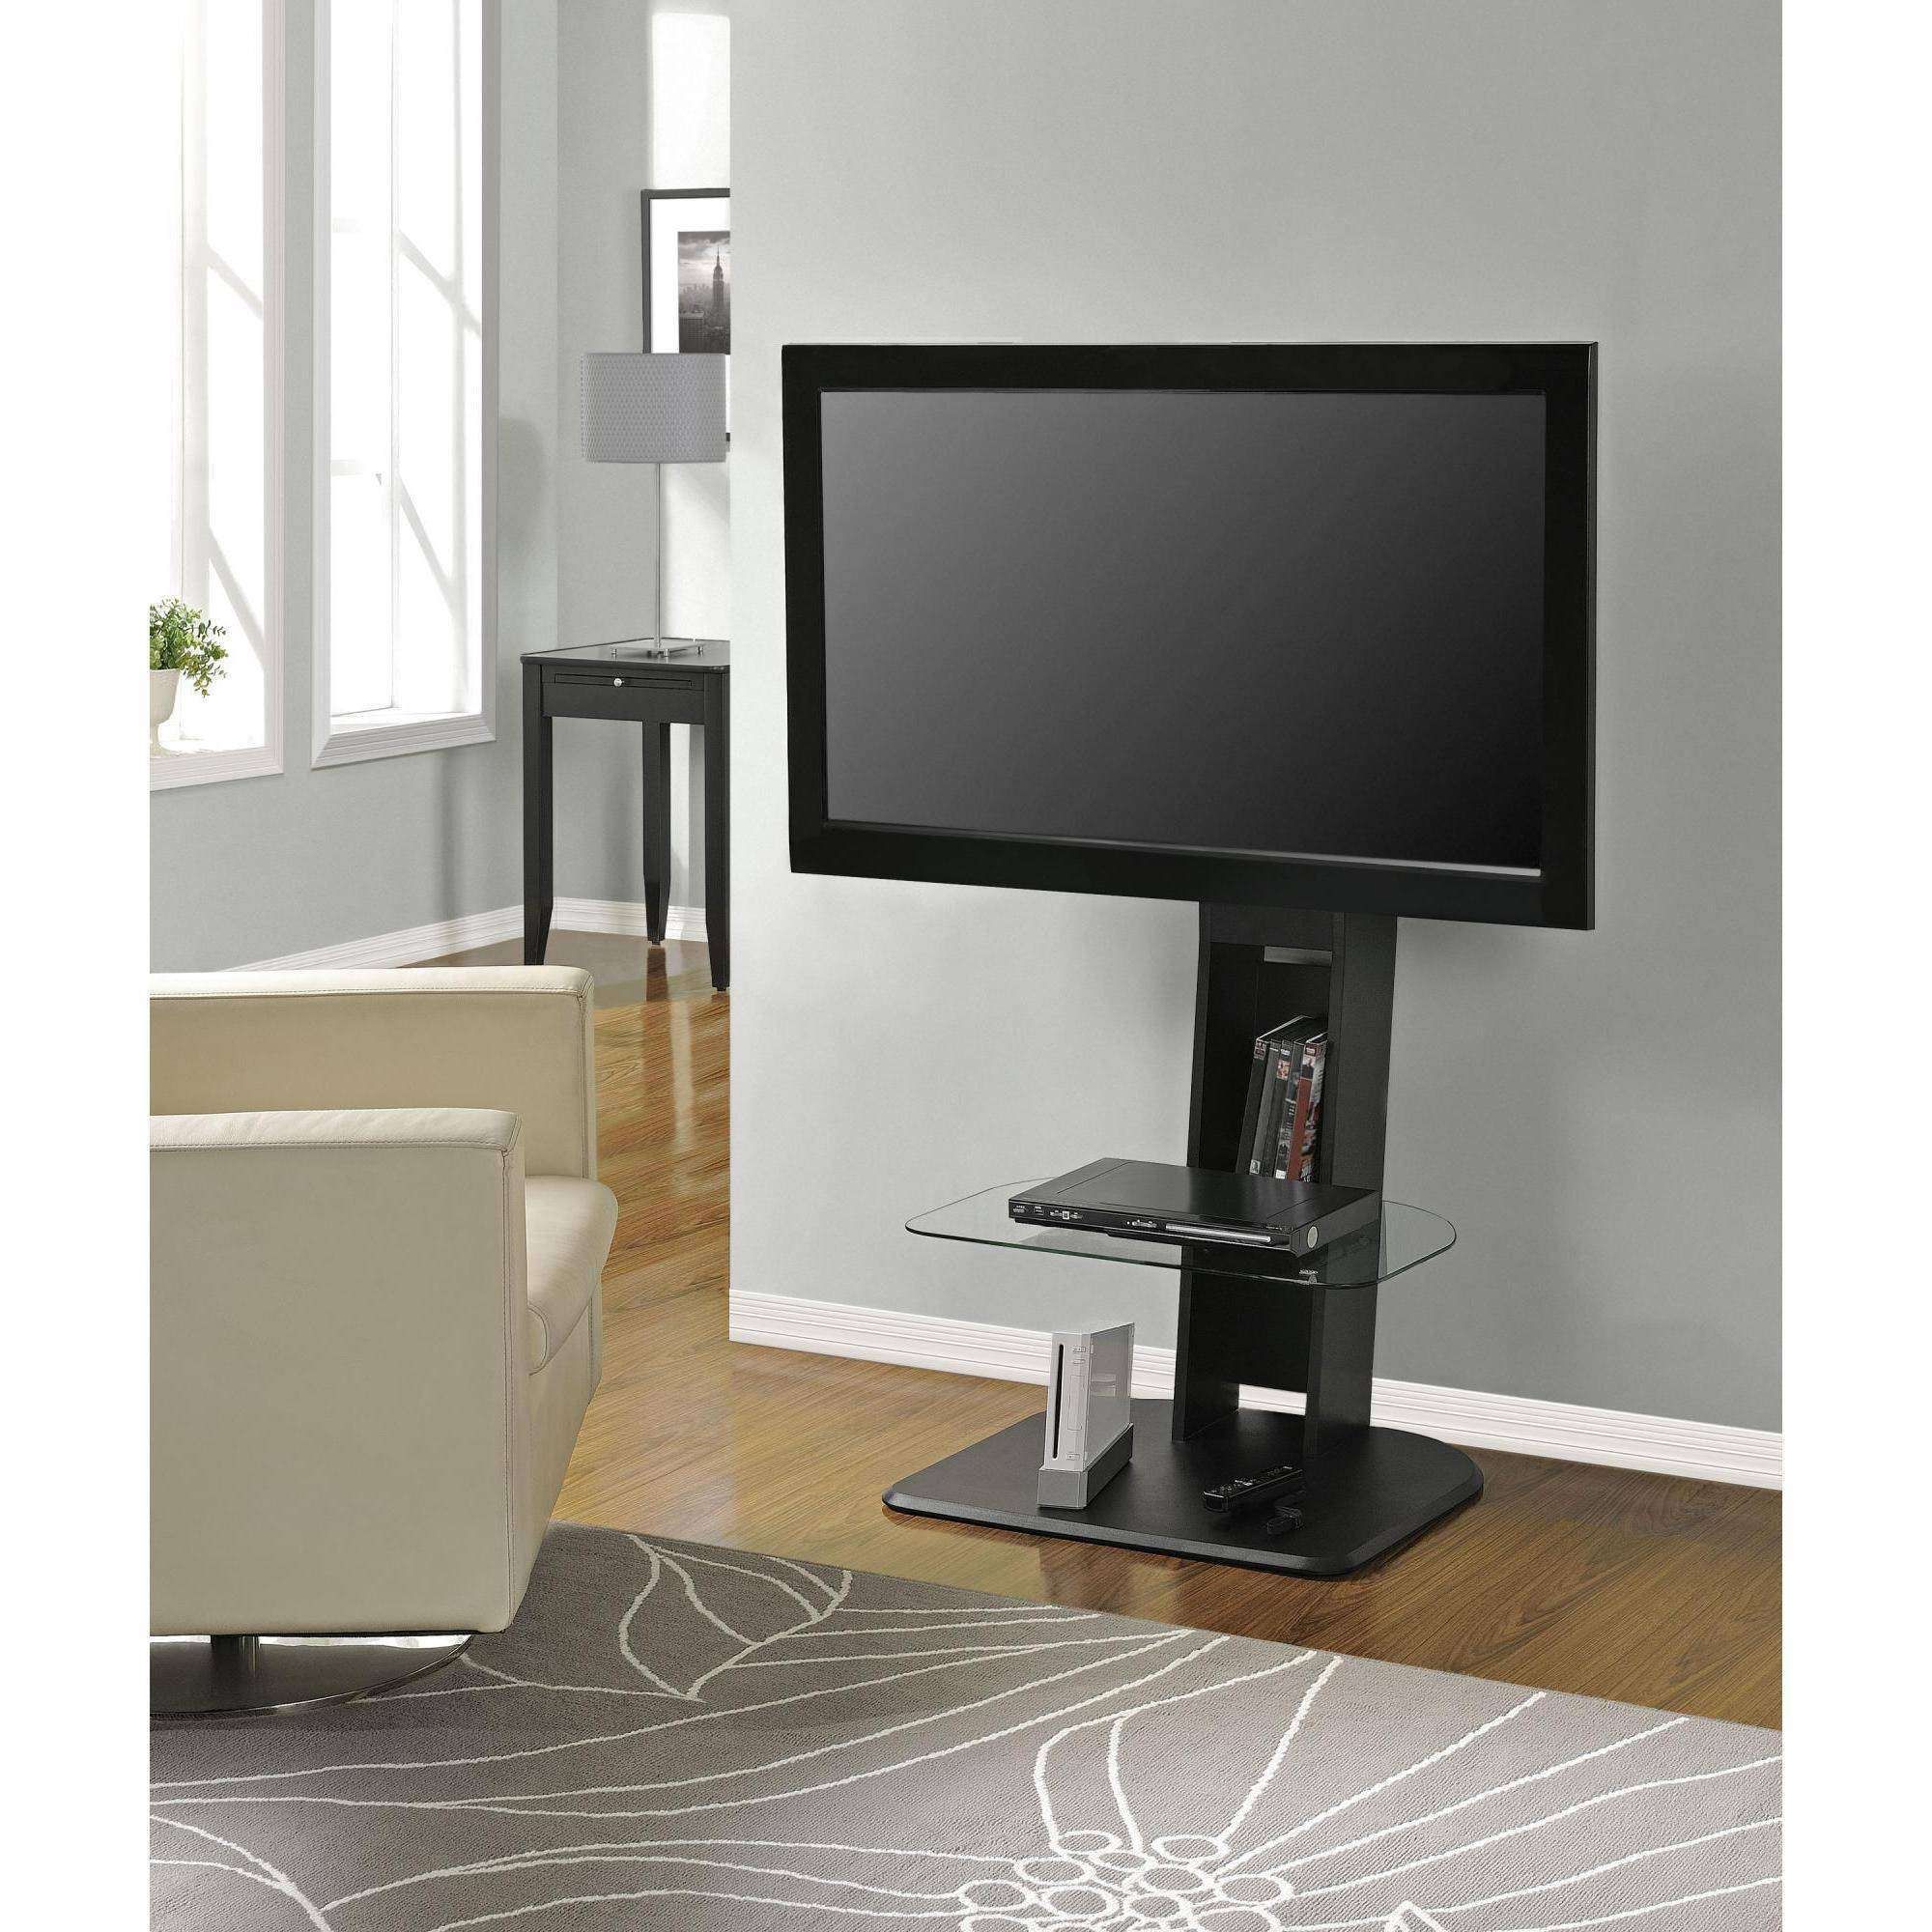 Ameriwood Home Galaxy Tv Stand With Mount For Tvs Up To 50", Black With Sleek Tv Stands (View 1 of 15)